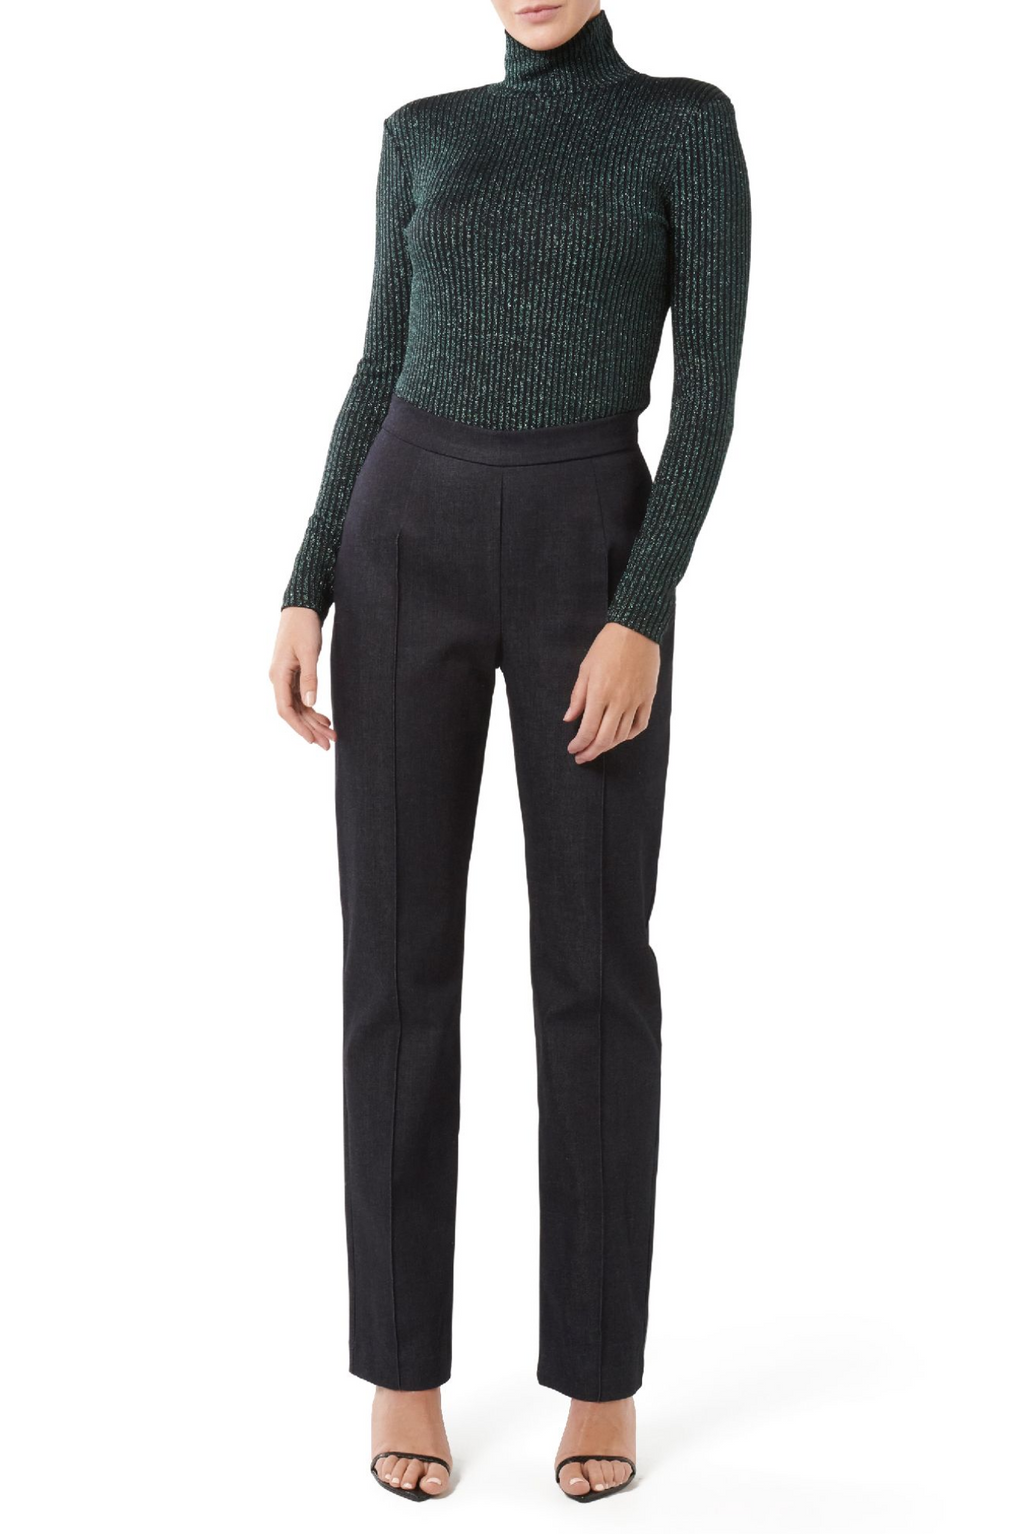 Dima High Neck Knit - Forest Green